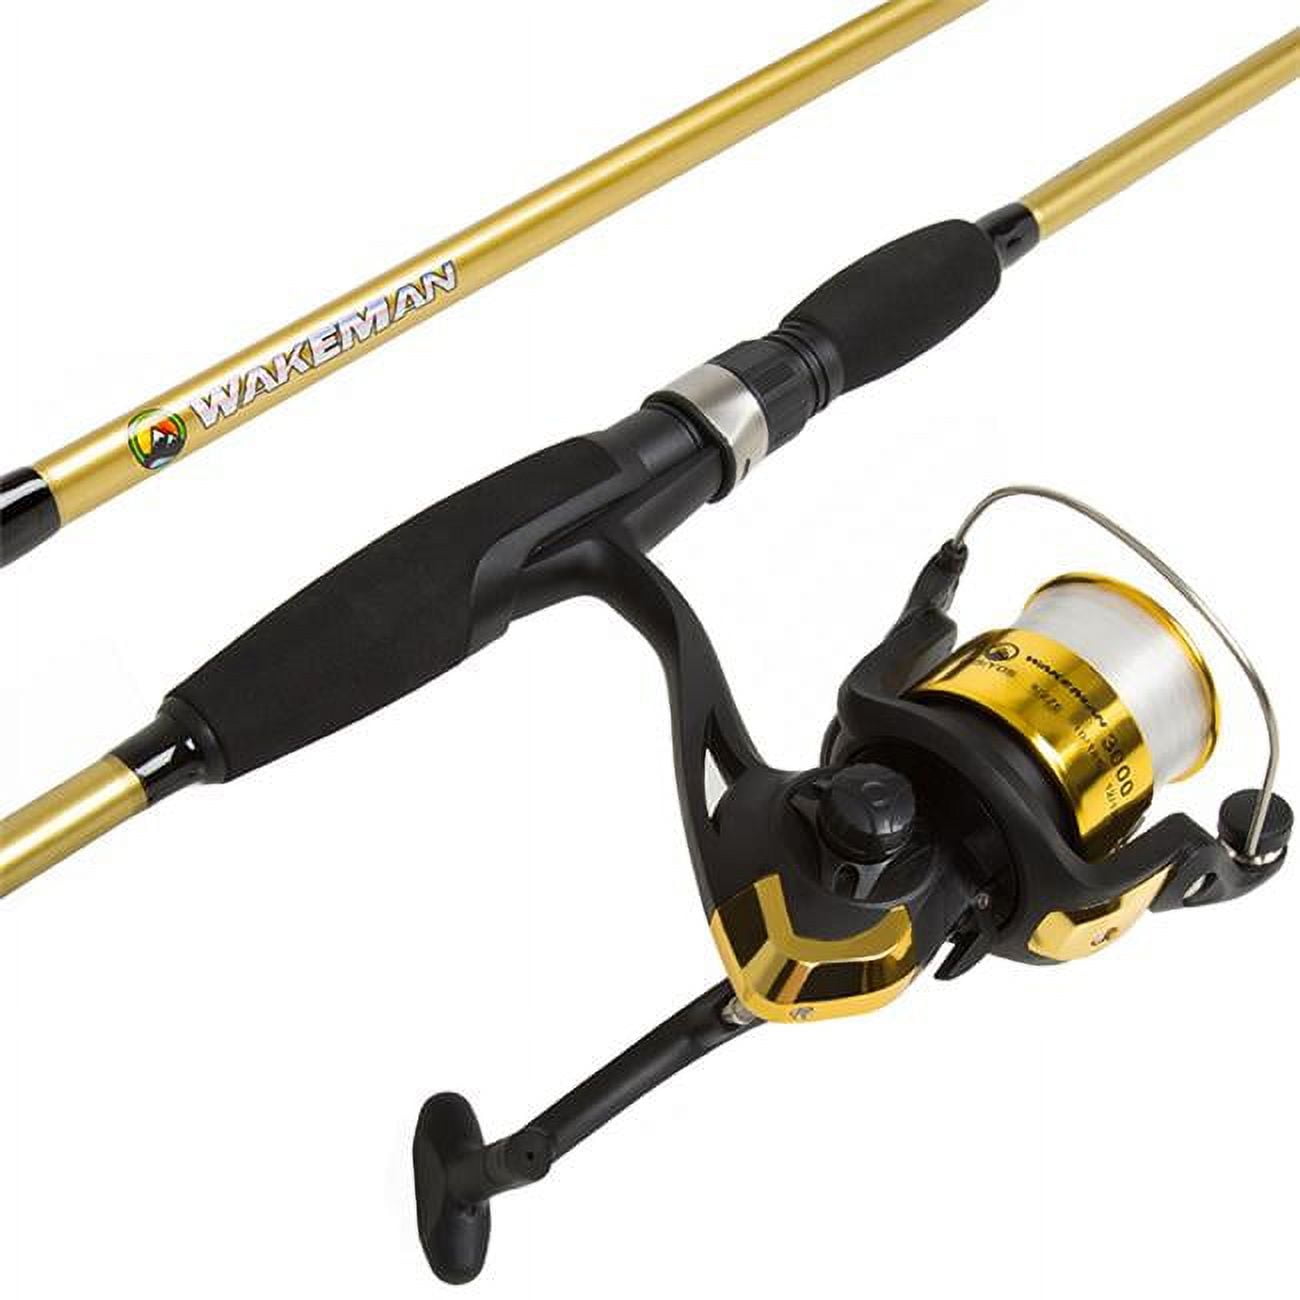 Strike Series Silver Open Faced 2 Pc Long Rod and Reel Combo Fishing Pole